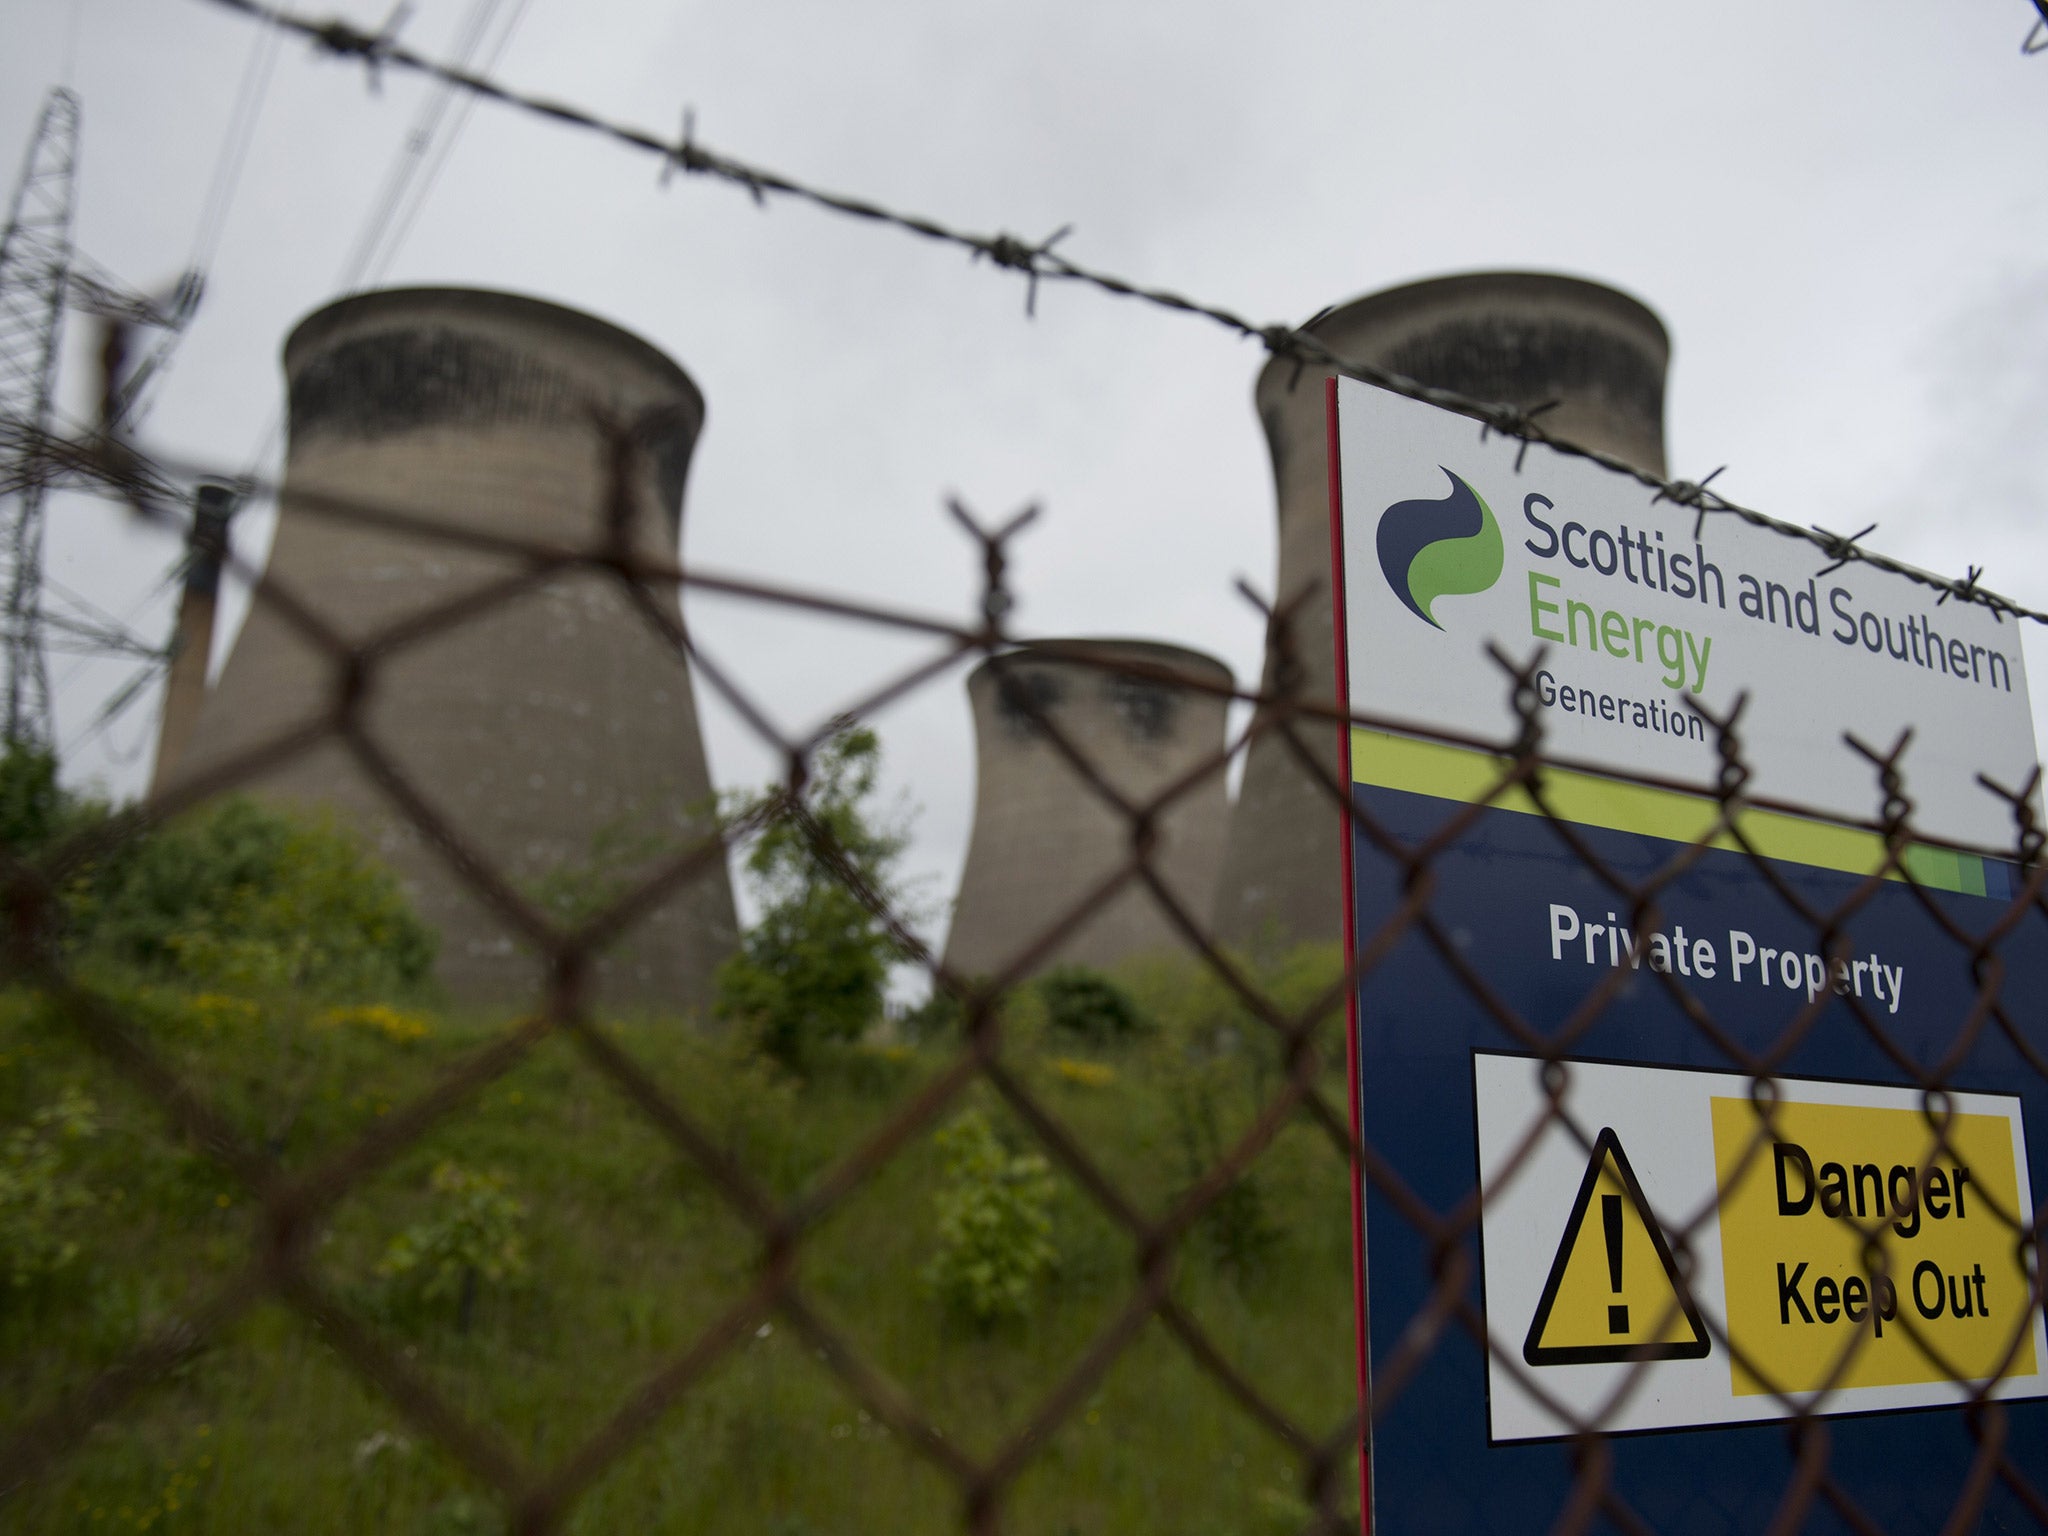 SSE is closing its coal-fired Ferrybridge power station